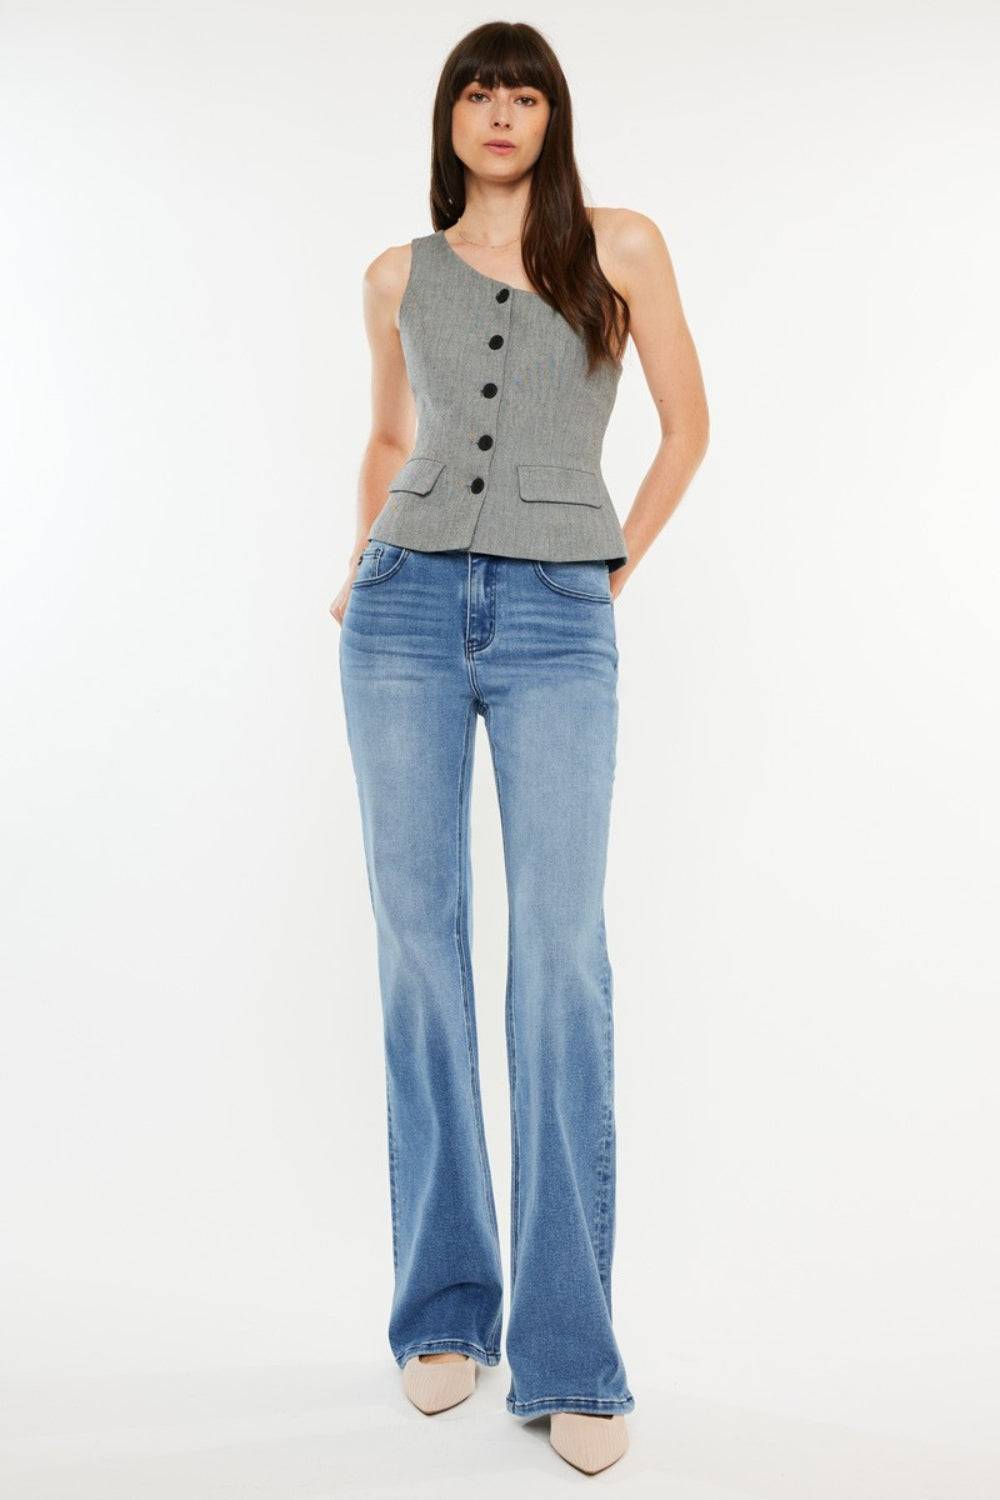 a woman wearing a gray vest and jeans